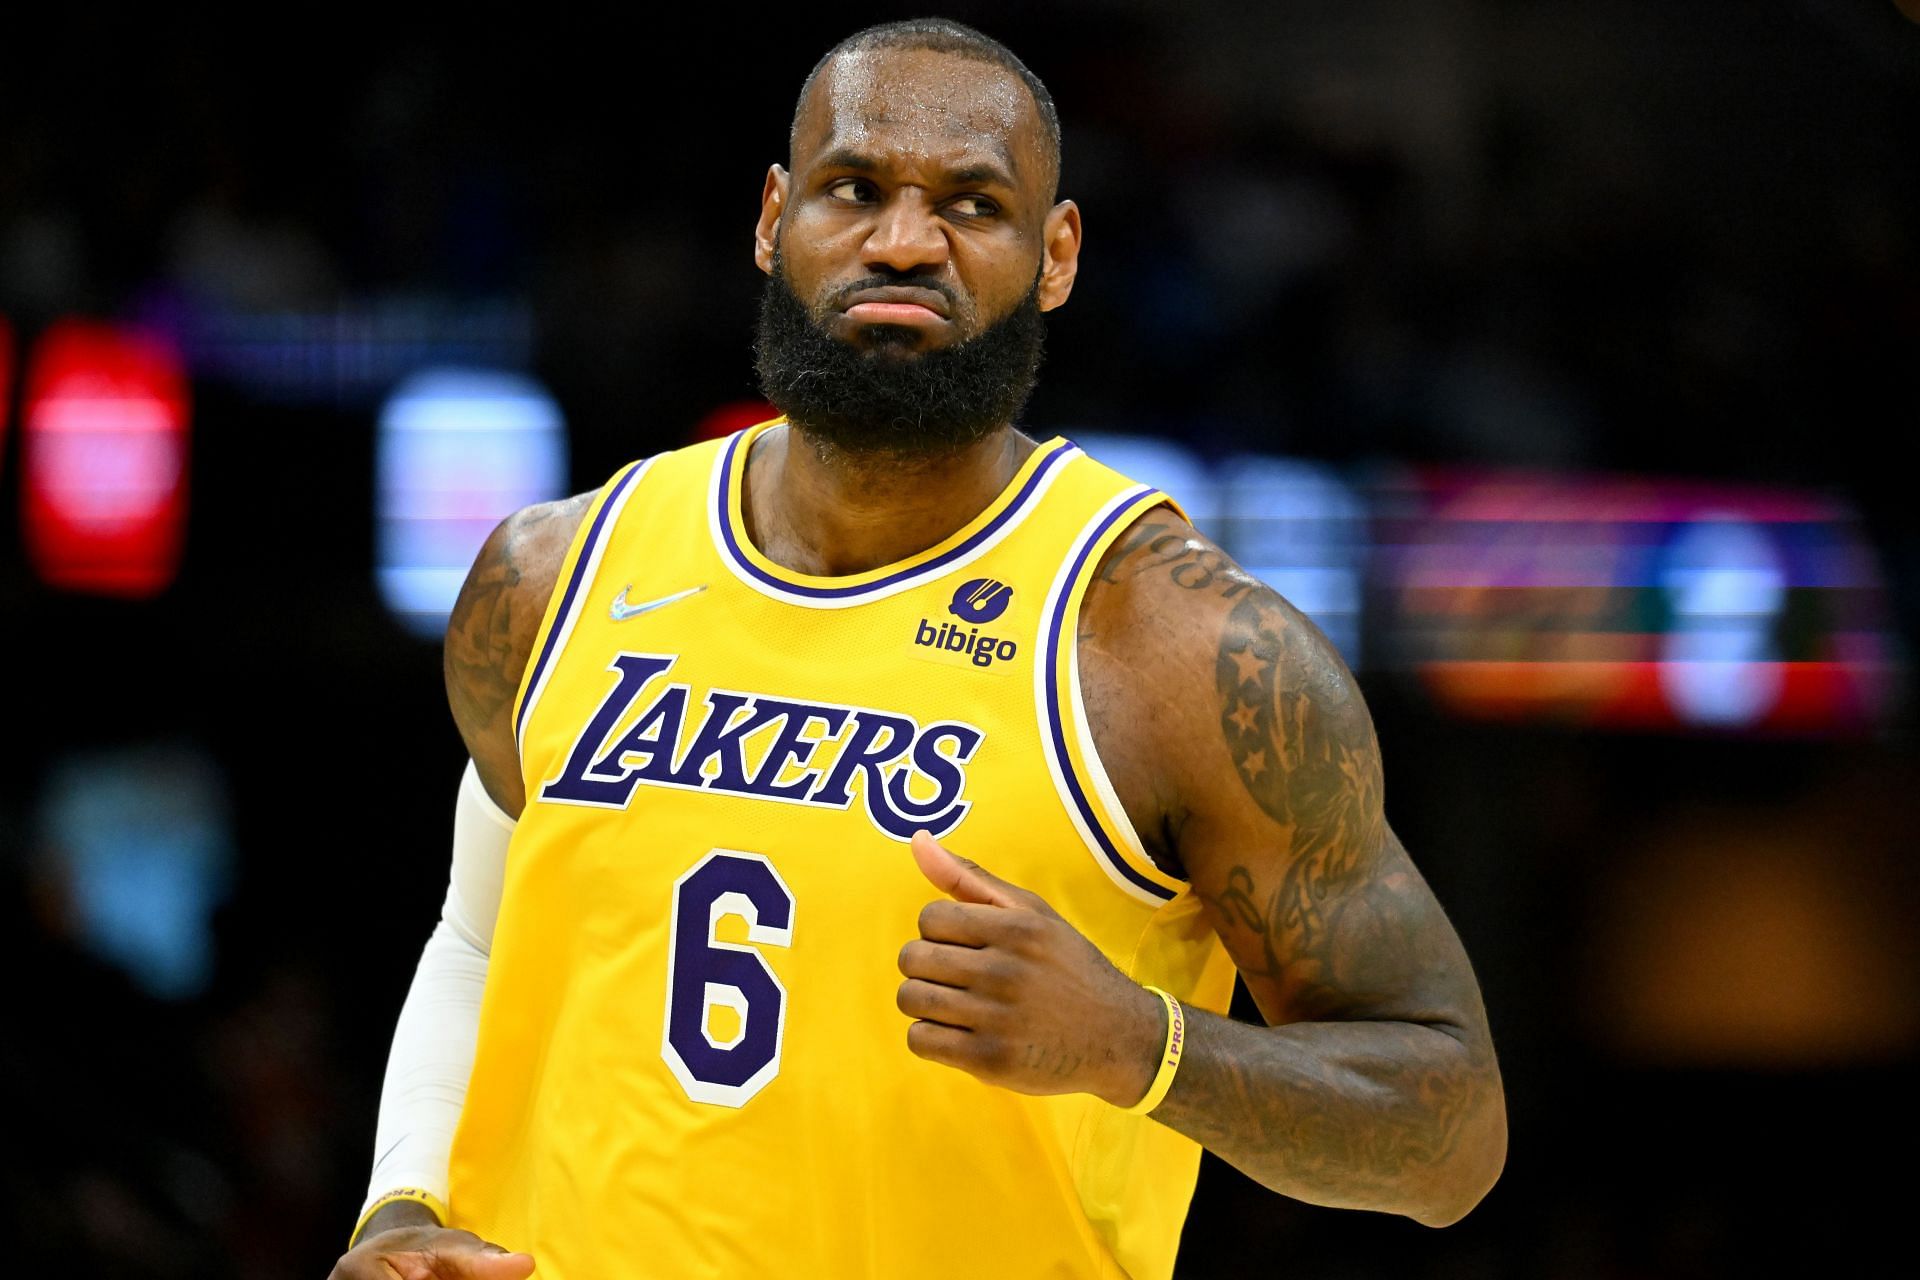 LeBron James in action during LA Lakers v Cleveland Cavaliers